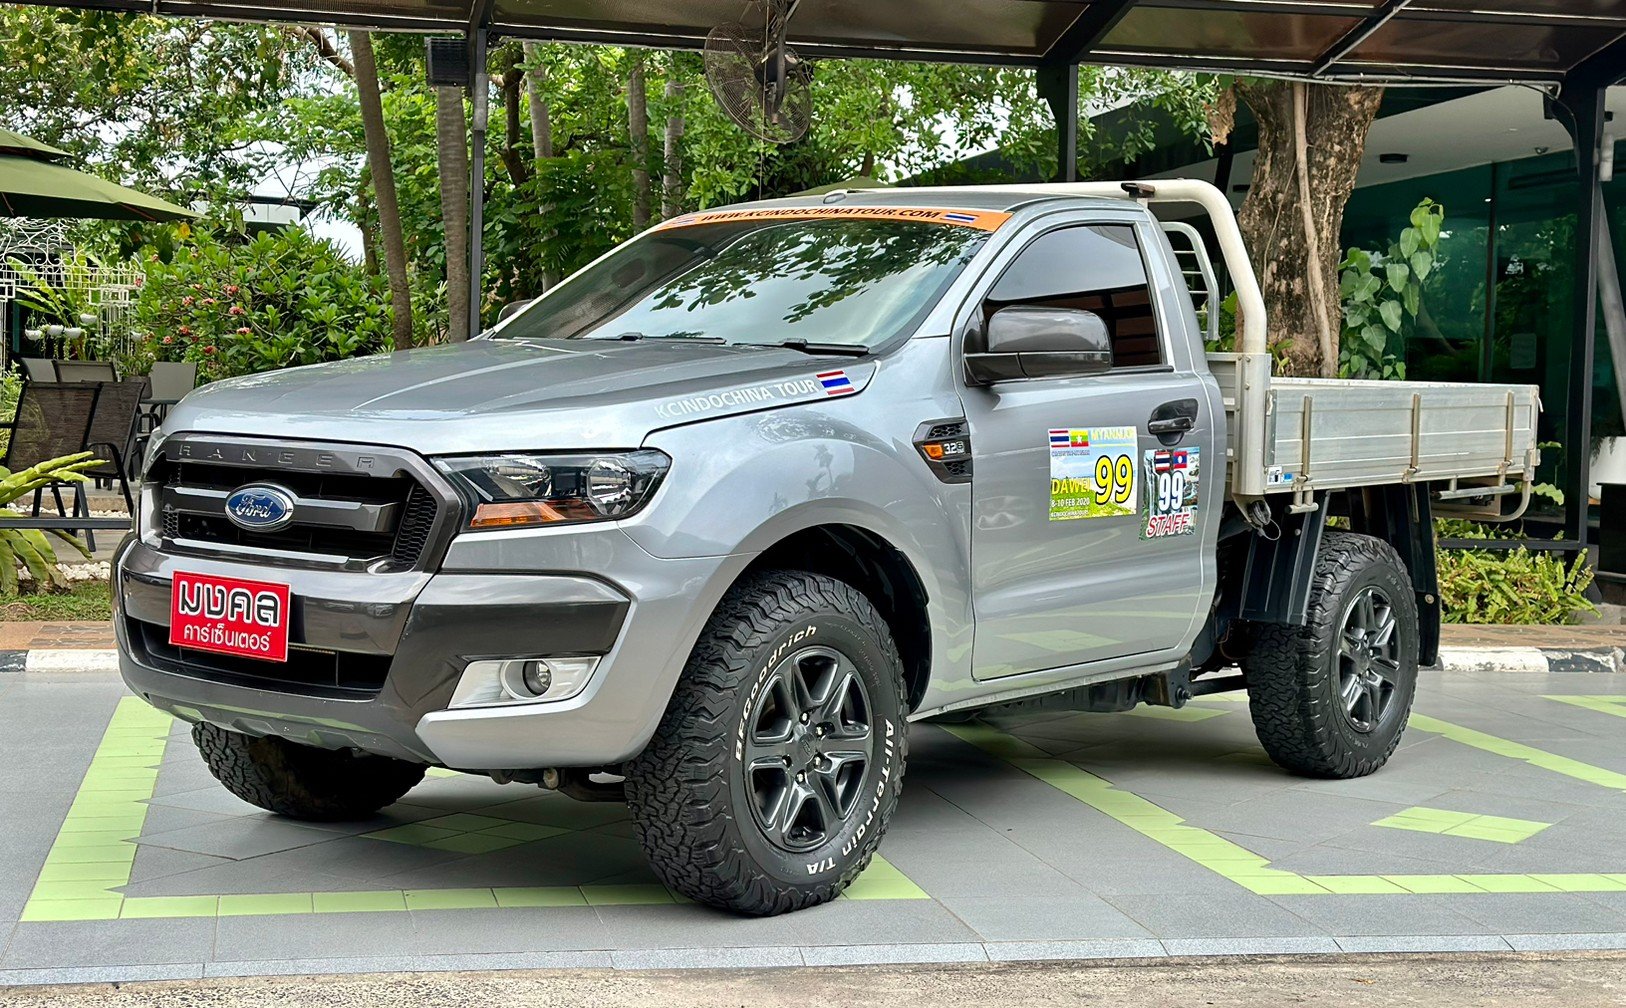 FORD RANGER STANDARD CAB 3.2 SWB A/T 2015 สีเทา (AAA-0026) 5-6